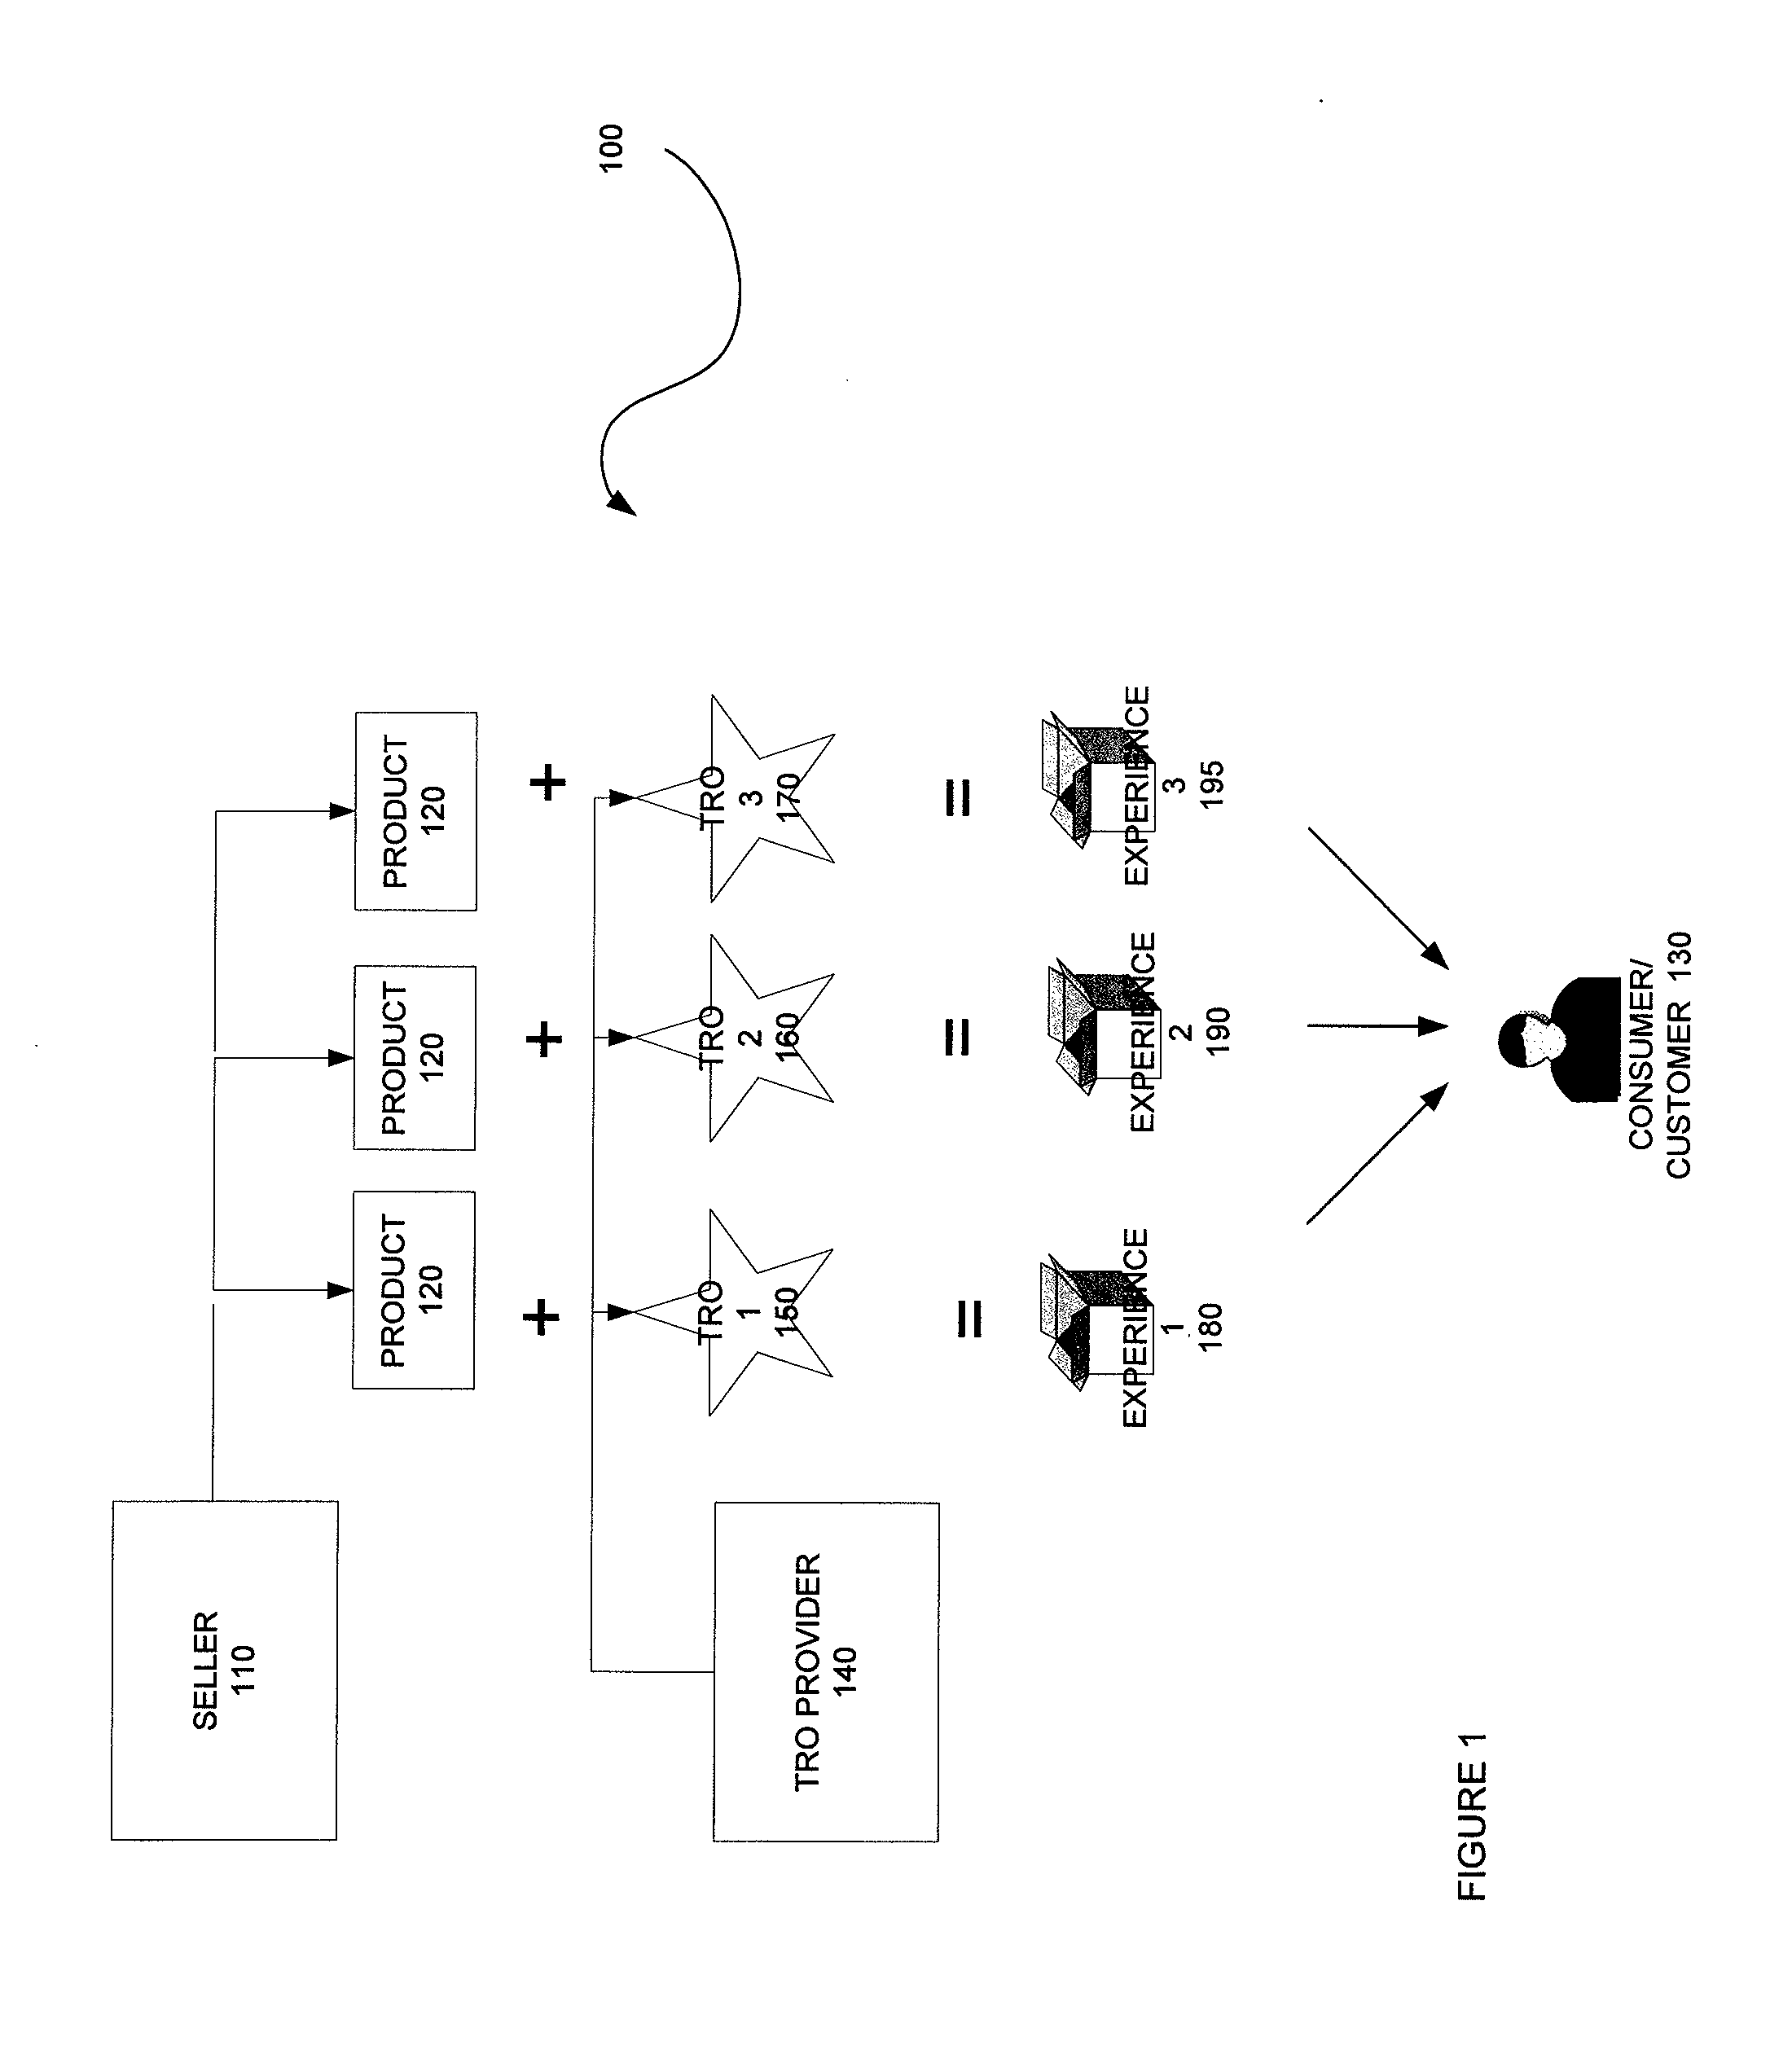 Method, system and components for obtaining, evaluating and/or utilizing seller, buyer and transaction data